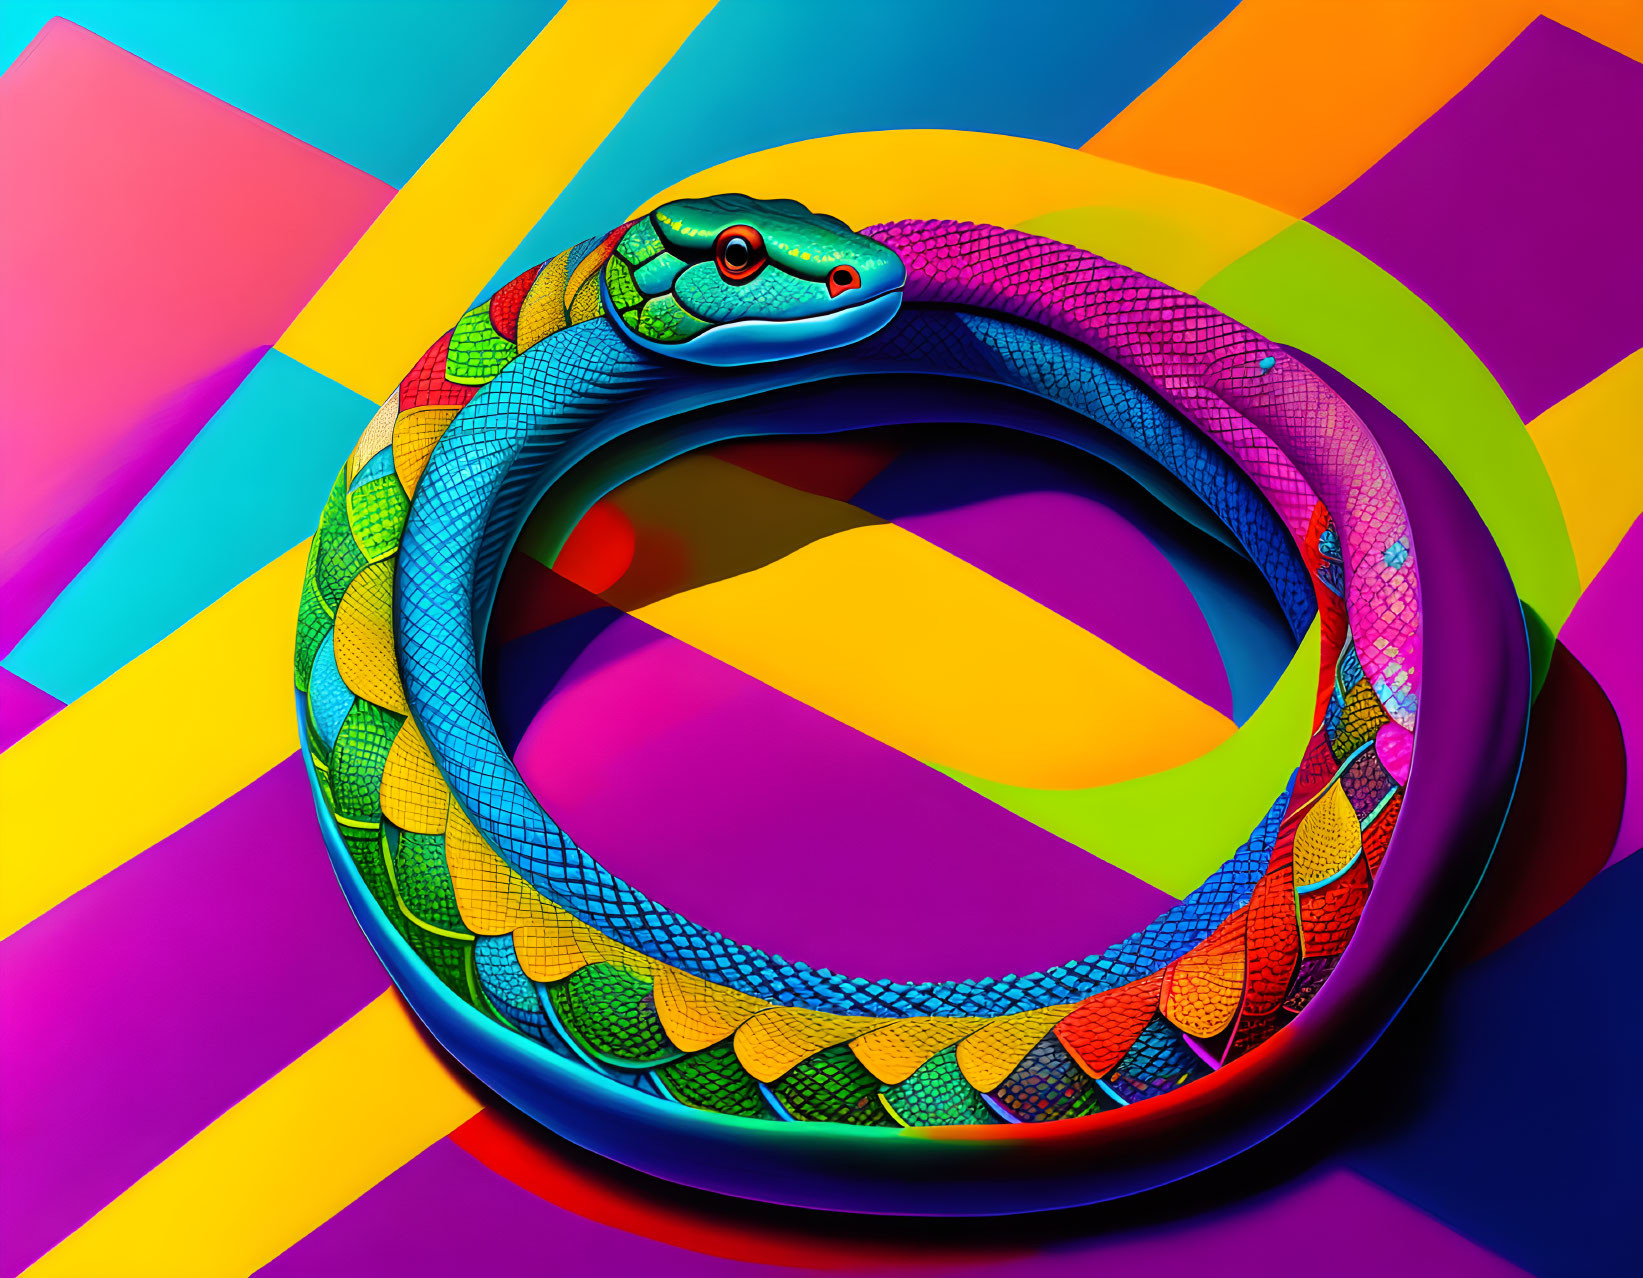 Colorful Coiled Snake Art on Striped Background